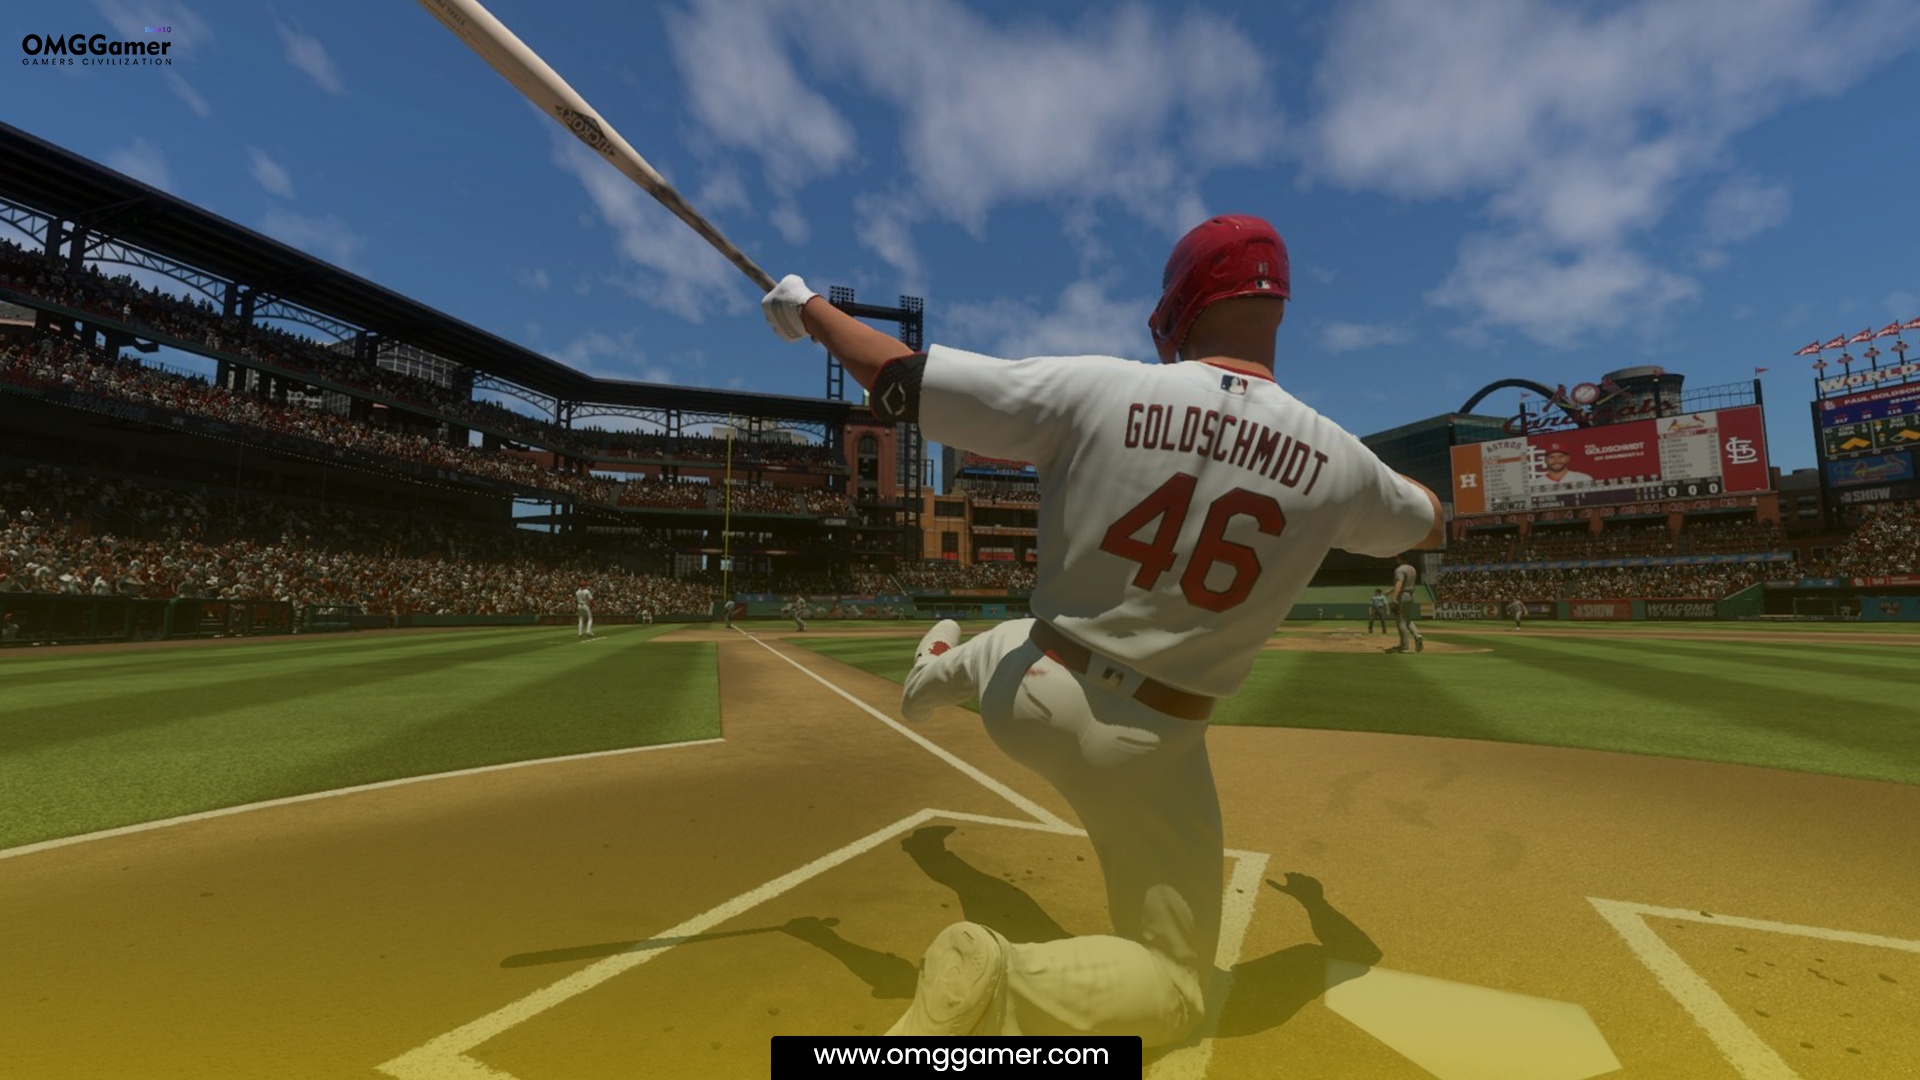 About MLB The Show 23